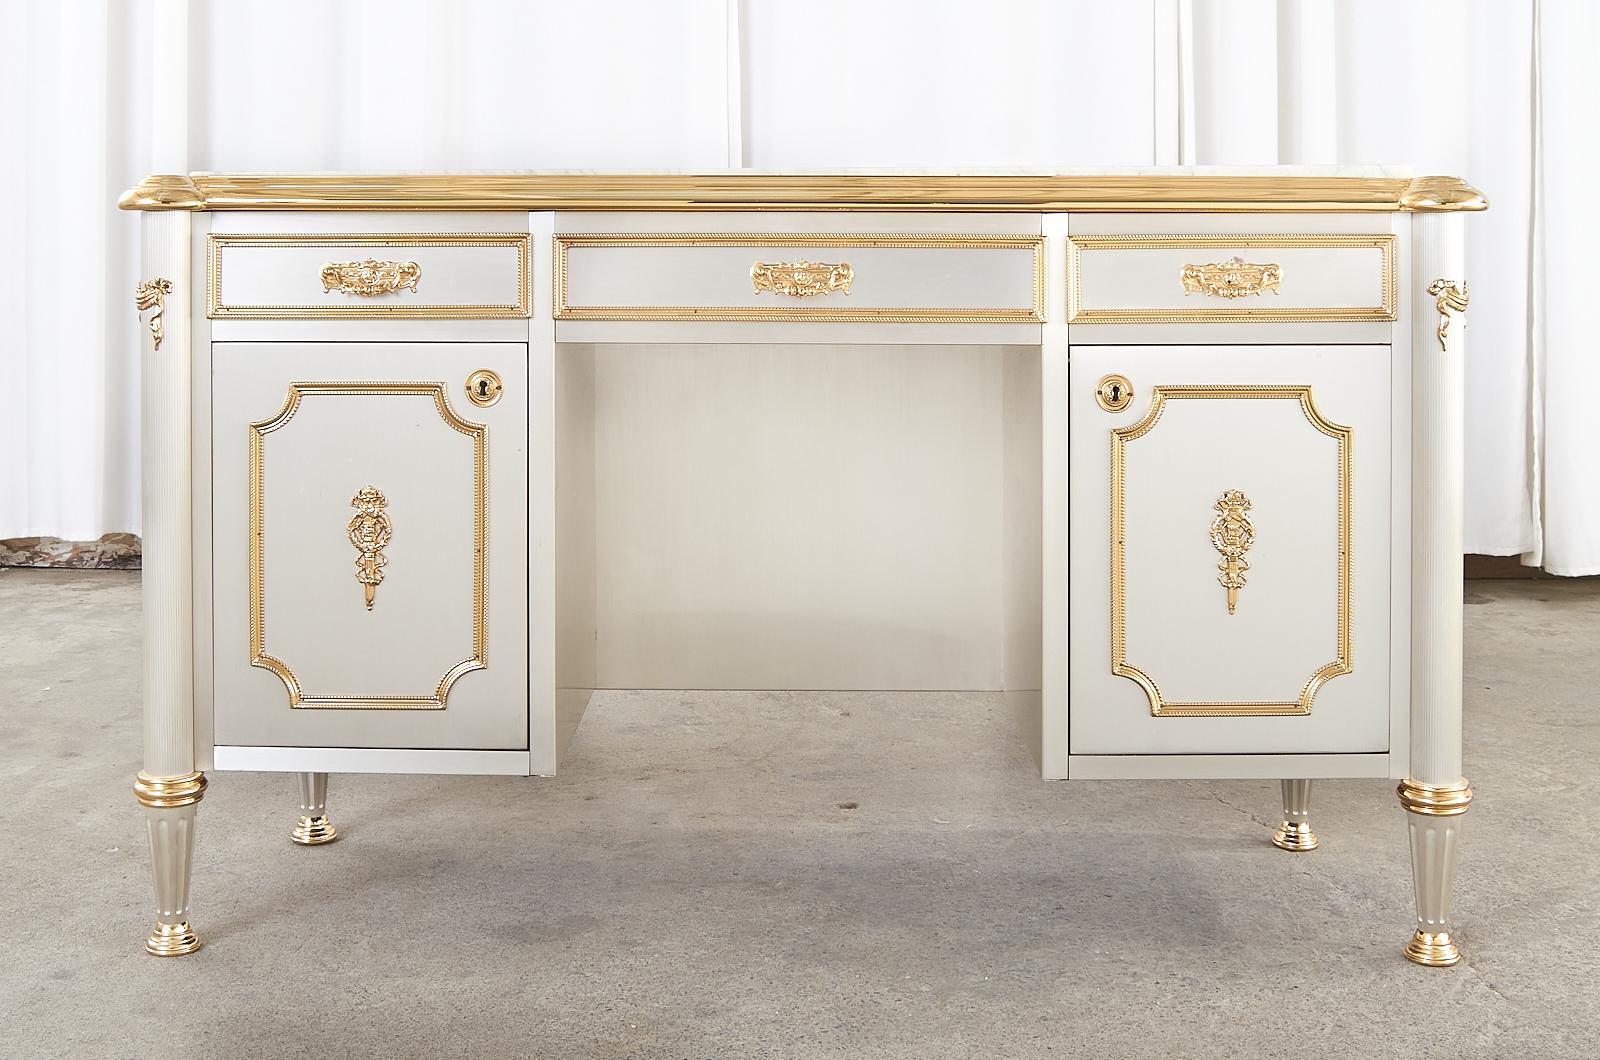 Opulent stainless steel mahogany writing table, bureau plat, or desk attributed to Maison Jansen, France. The desk features a thick slab of quartz Carrara style marble on top with thick polished brass trim. The case is crafted from rich radiant